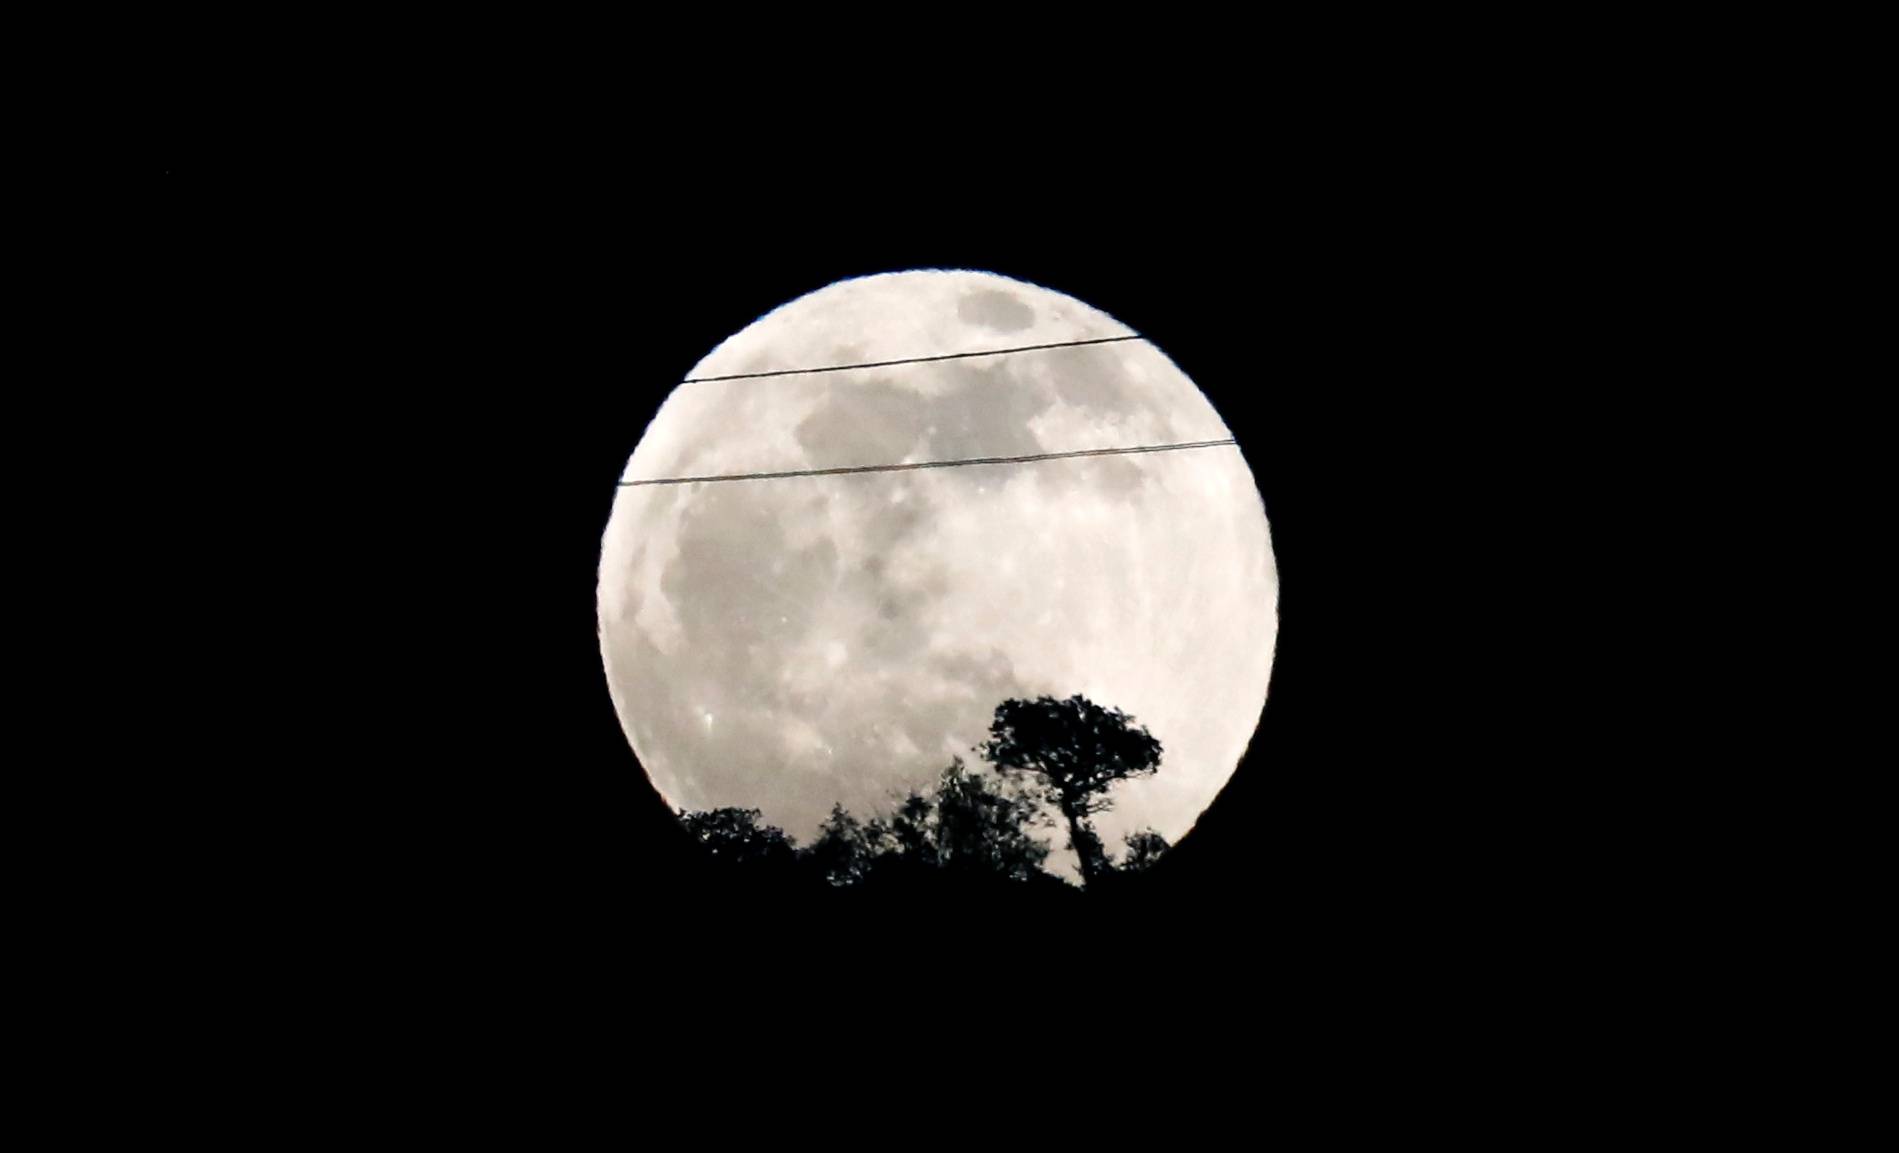 The full moon is seen rising behind a tree during the penumbral lunar eclipse in Ronda, near Malaga